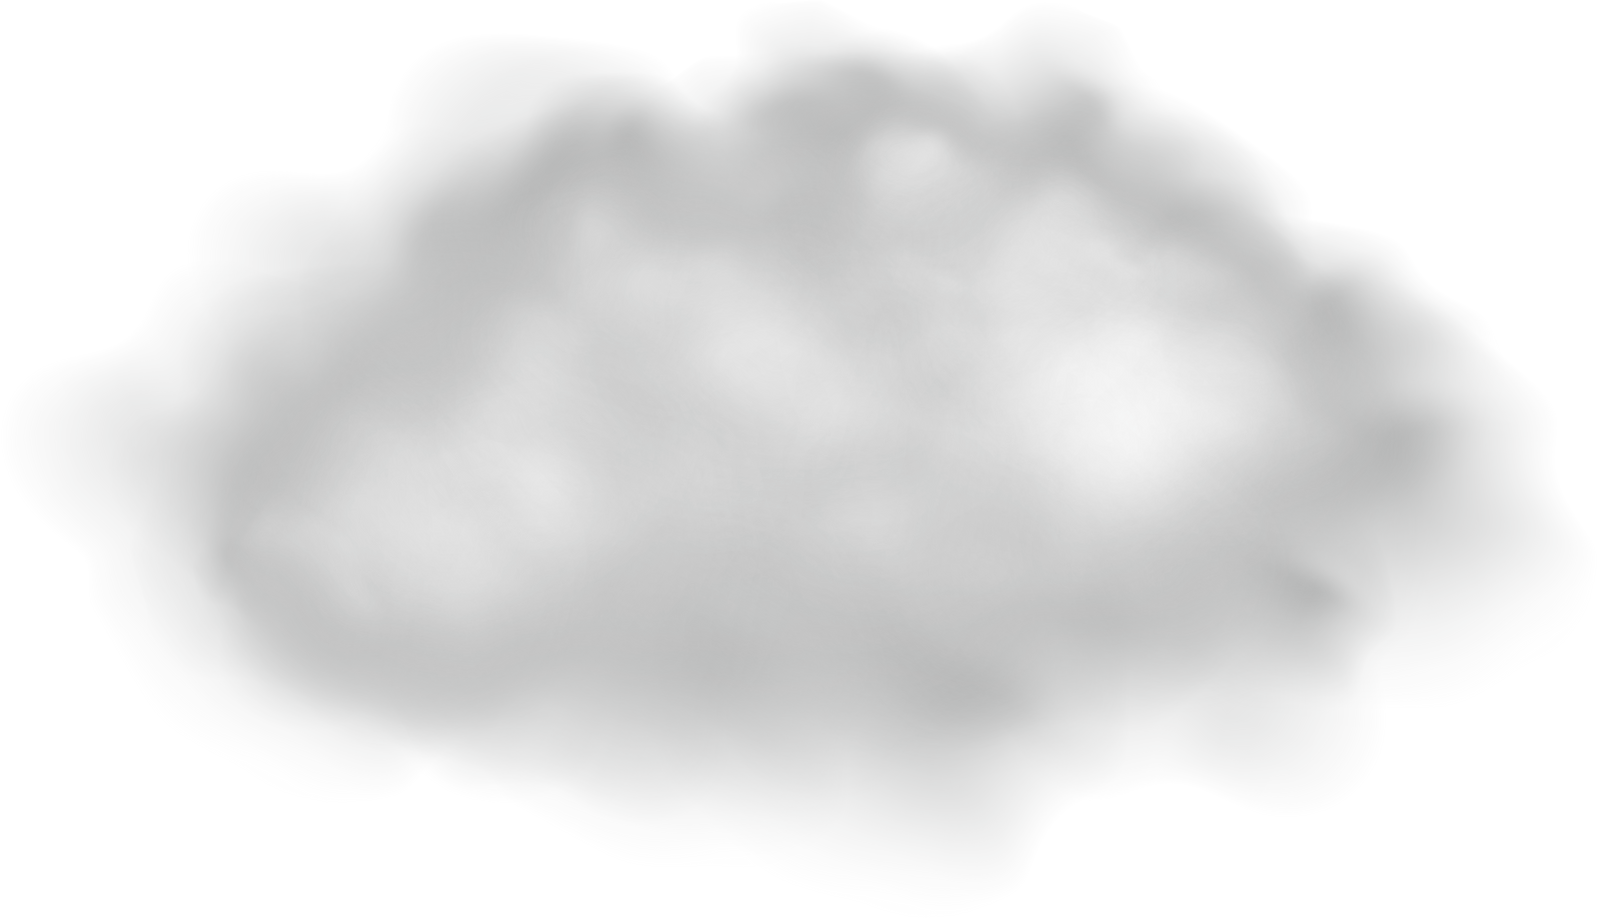 Abstract Cloud Overlay